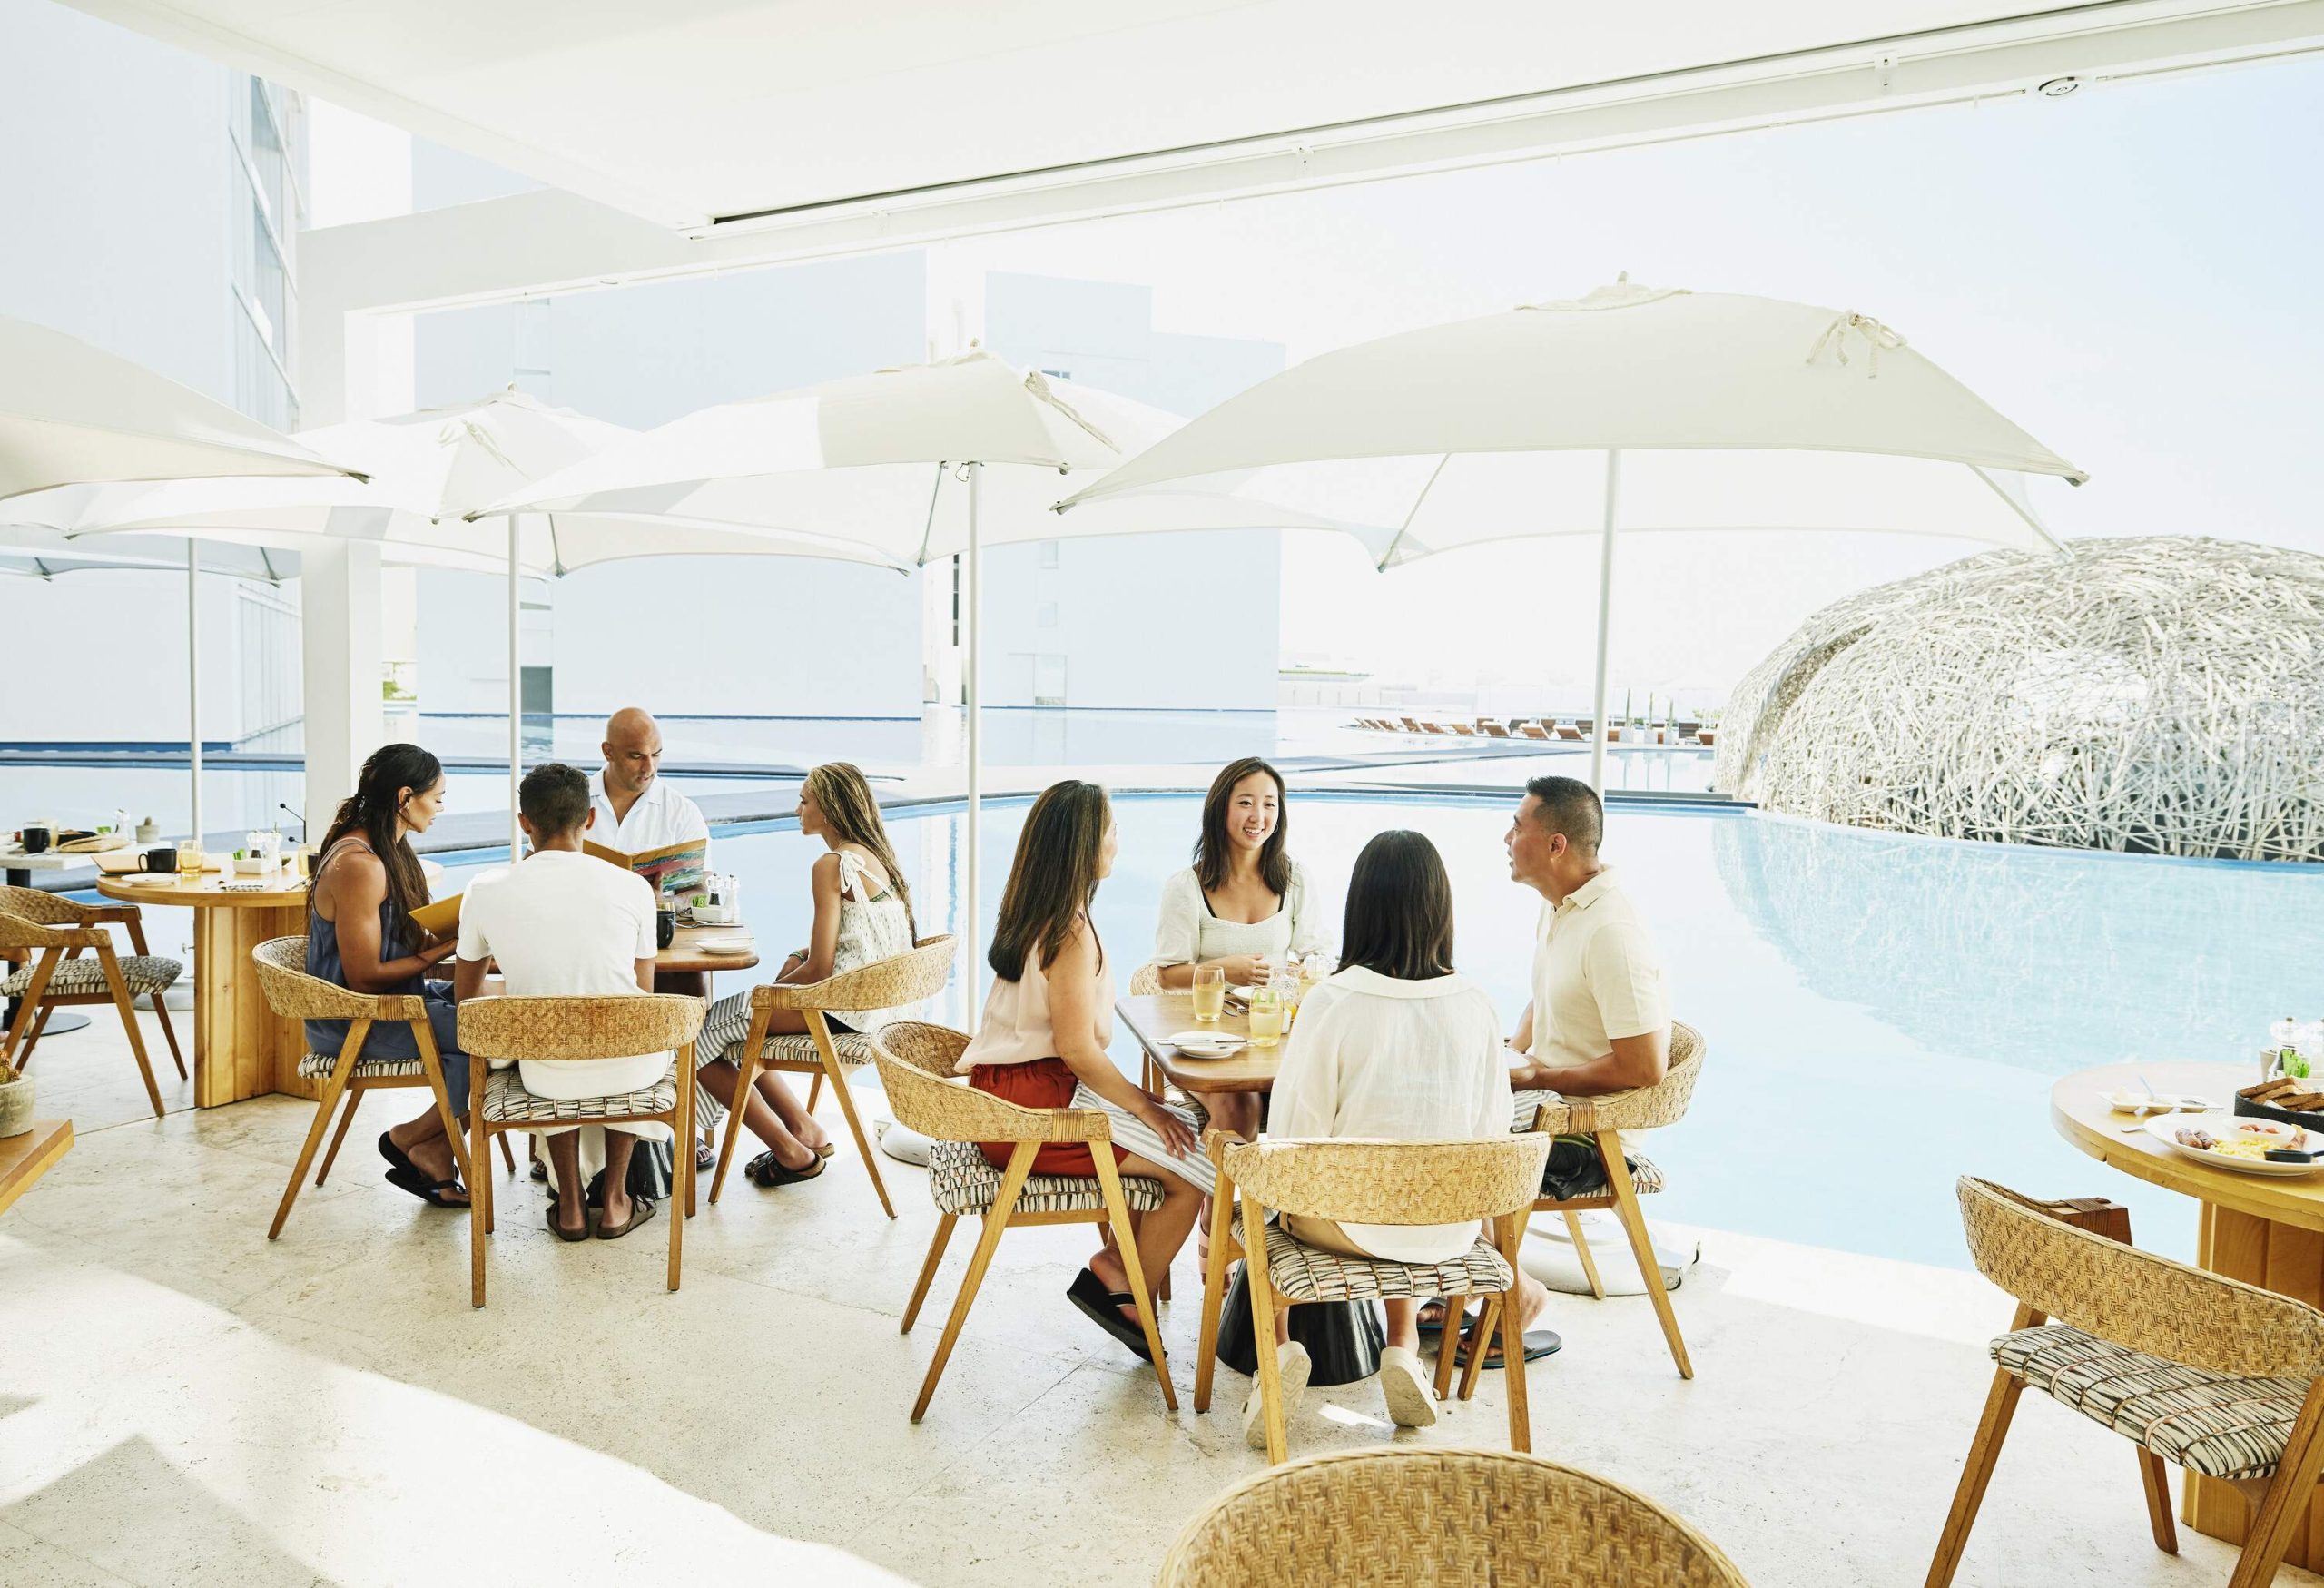 Families having lunch or breakfast at a poolside restaurant